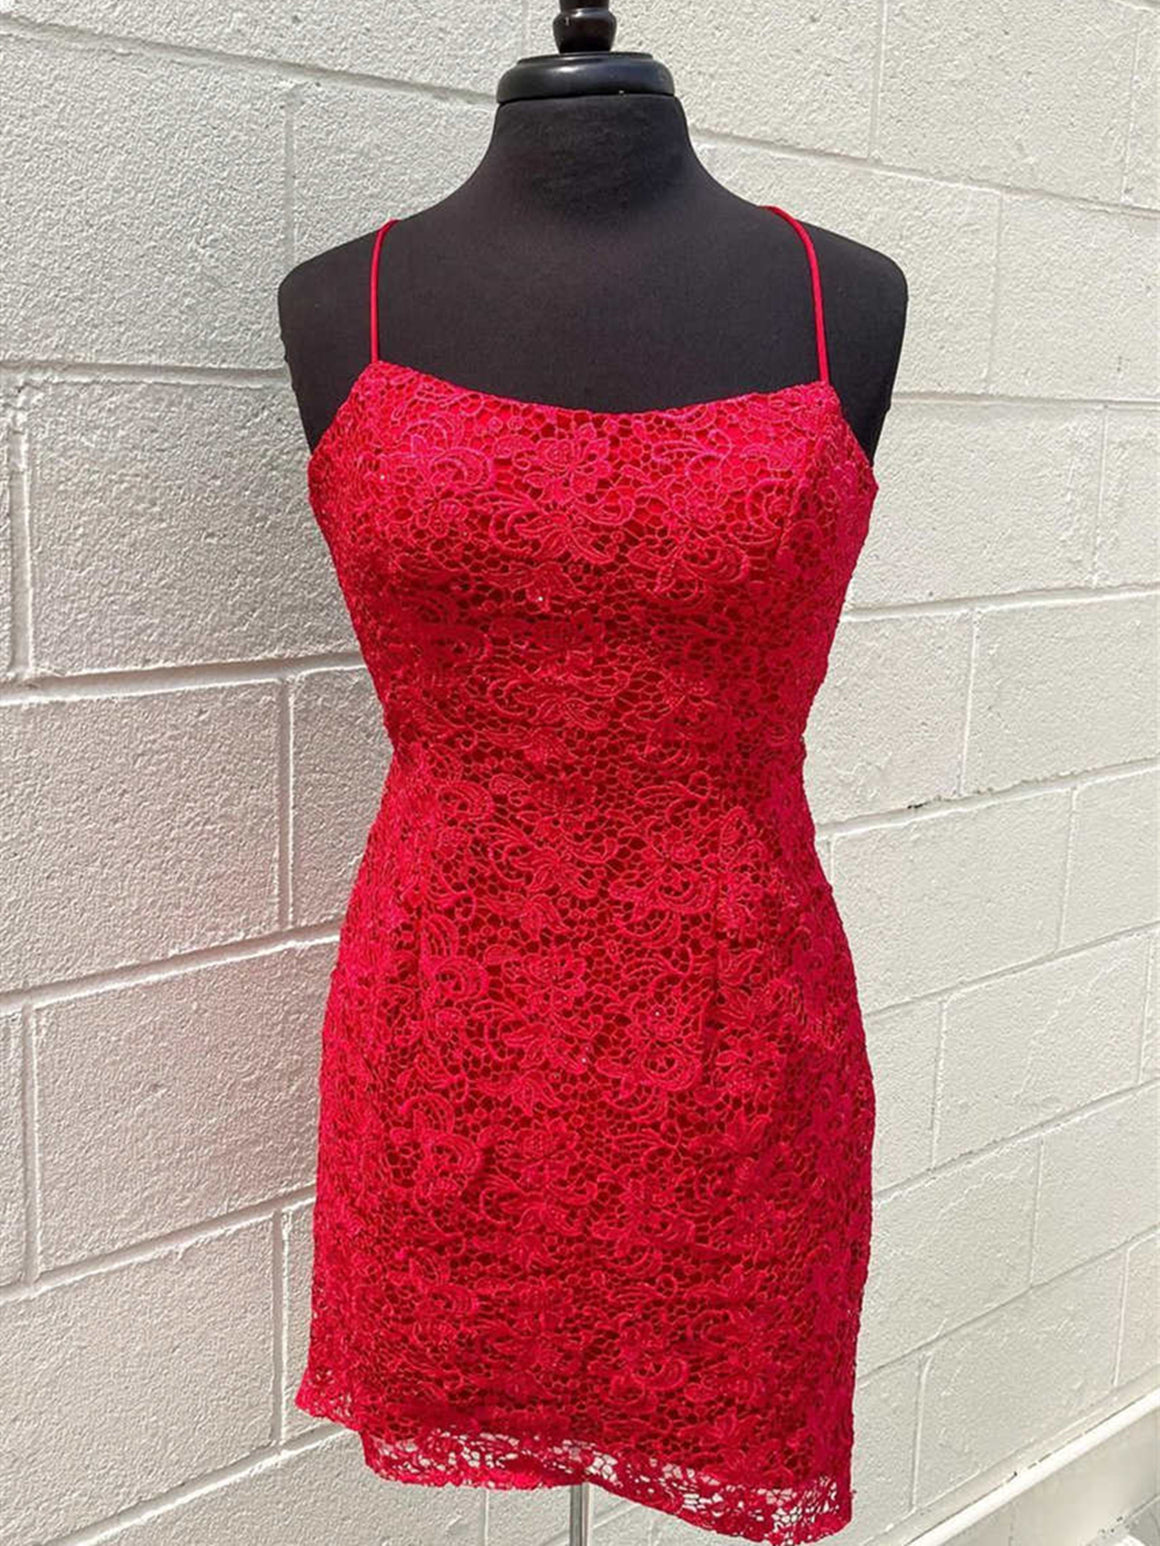 Short Backless Red Lace Prom Dresses, Open Back Short Red Lace Formal Homecoming Dresses